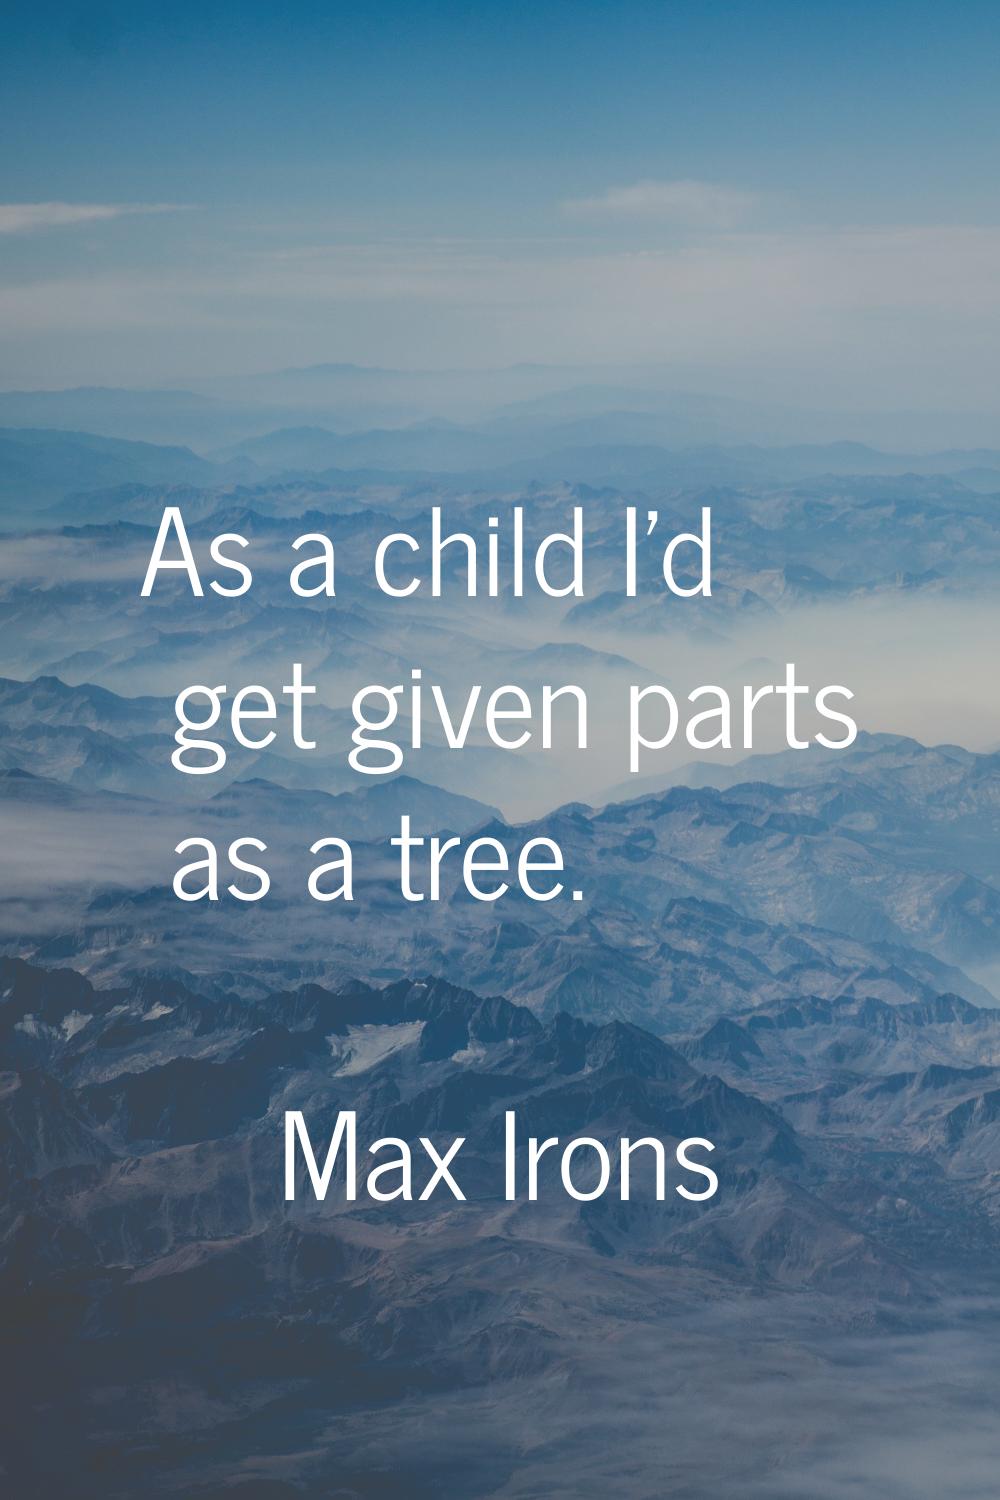 As a child I'd get given parts as a tree.